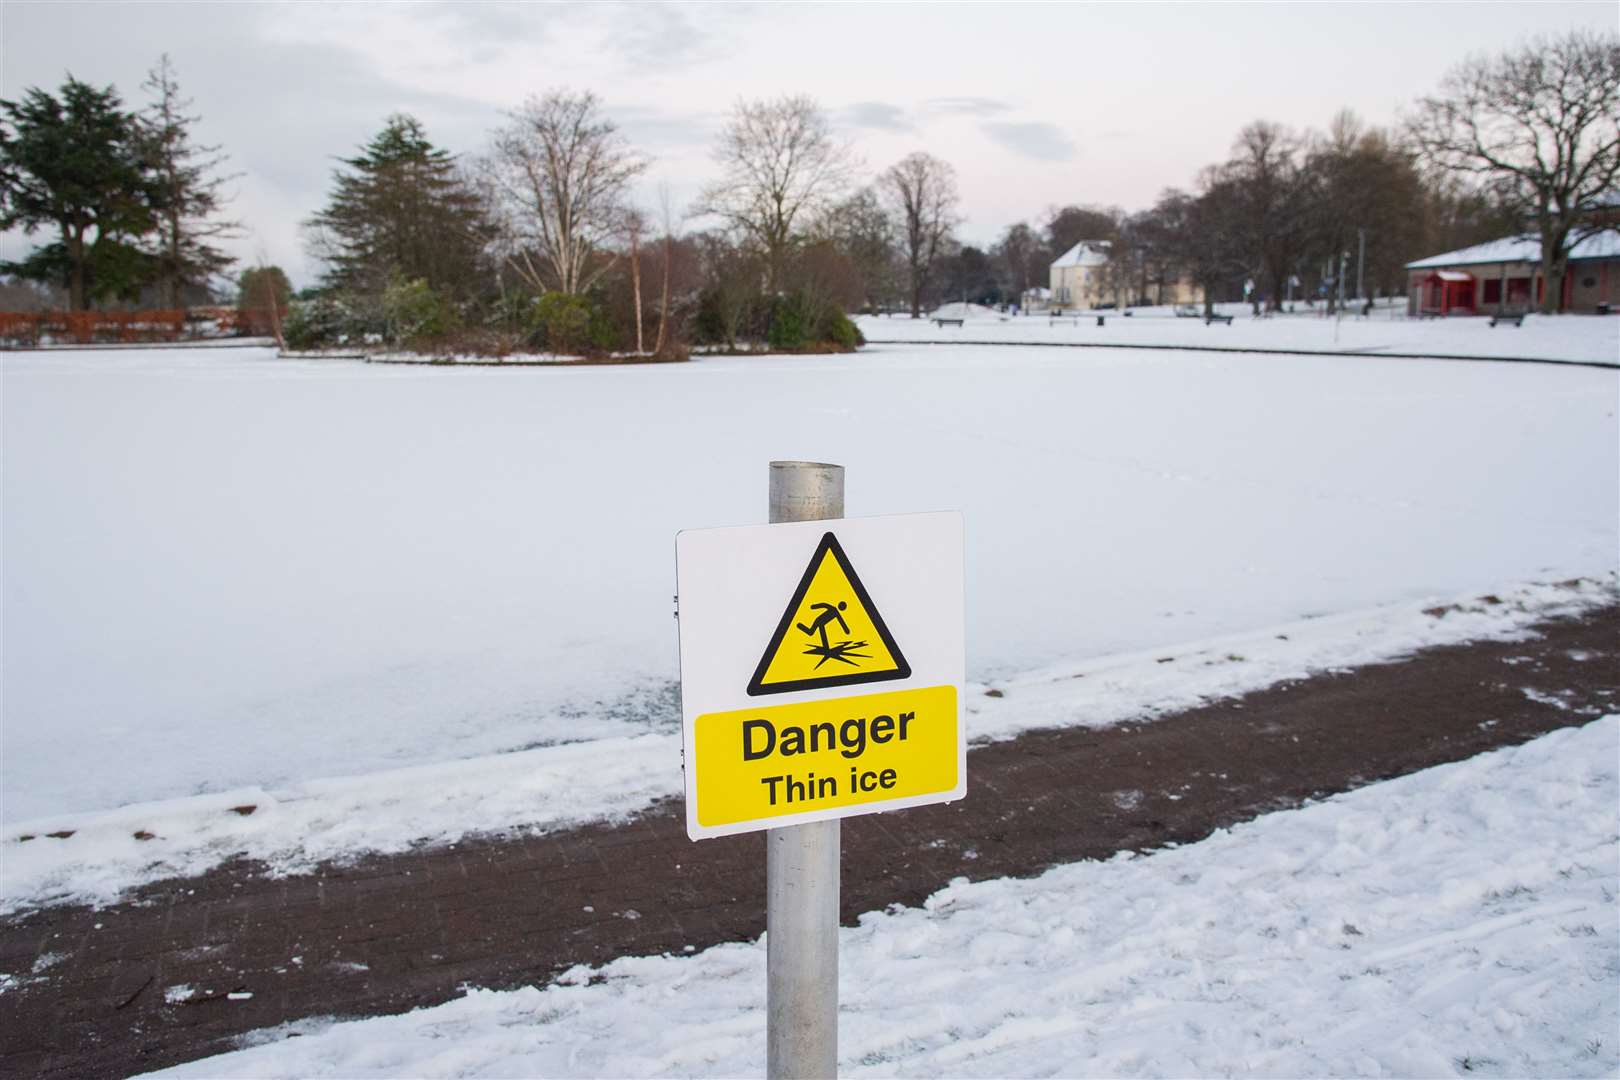 Water Safety Scotland is urging people to stay clear of iced-over ponds and other tracts of water. Picture: Daniel Forsyth